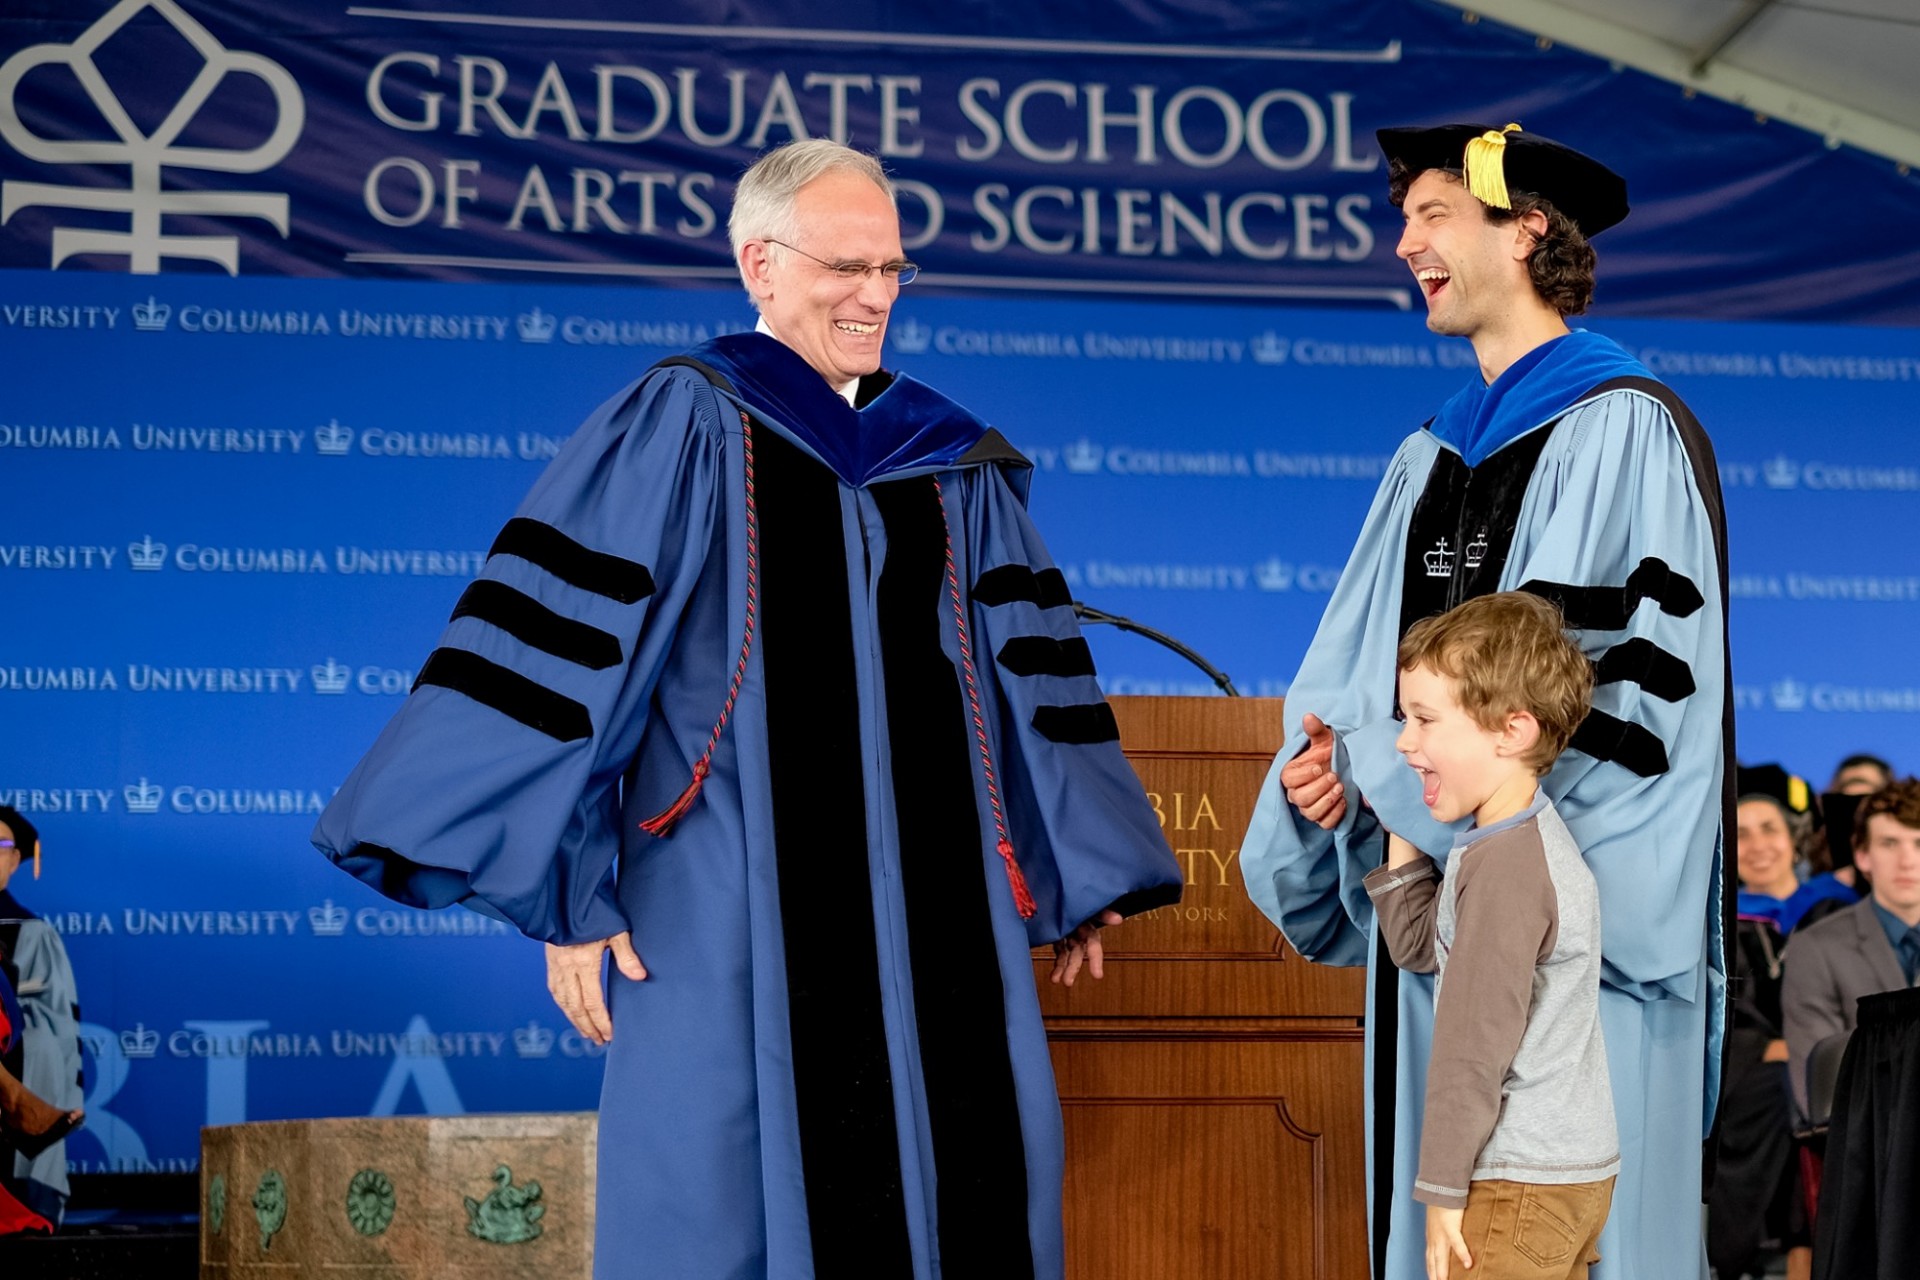 Dean Carlos J. Alonso, PhD, shares a laugh with a PhD candidate and his son.